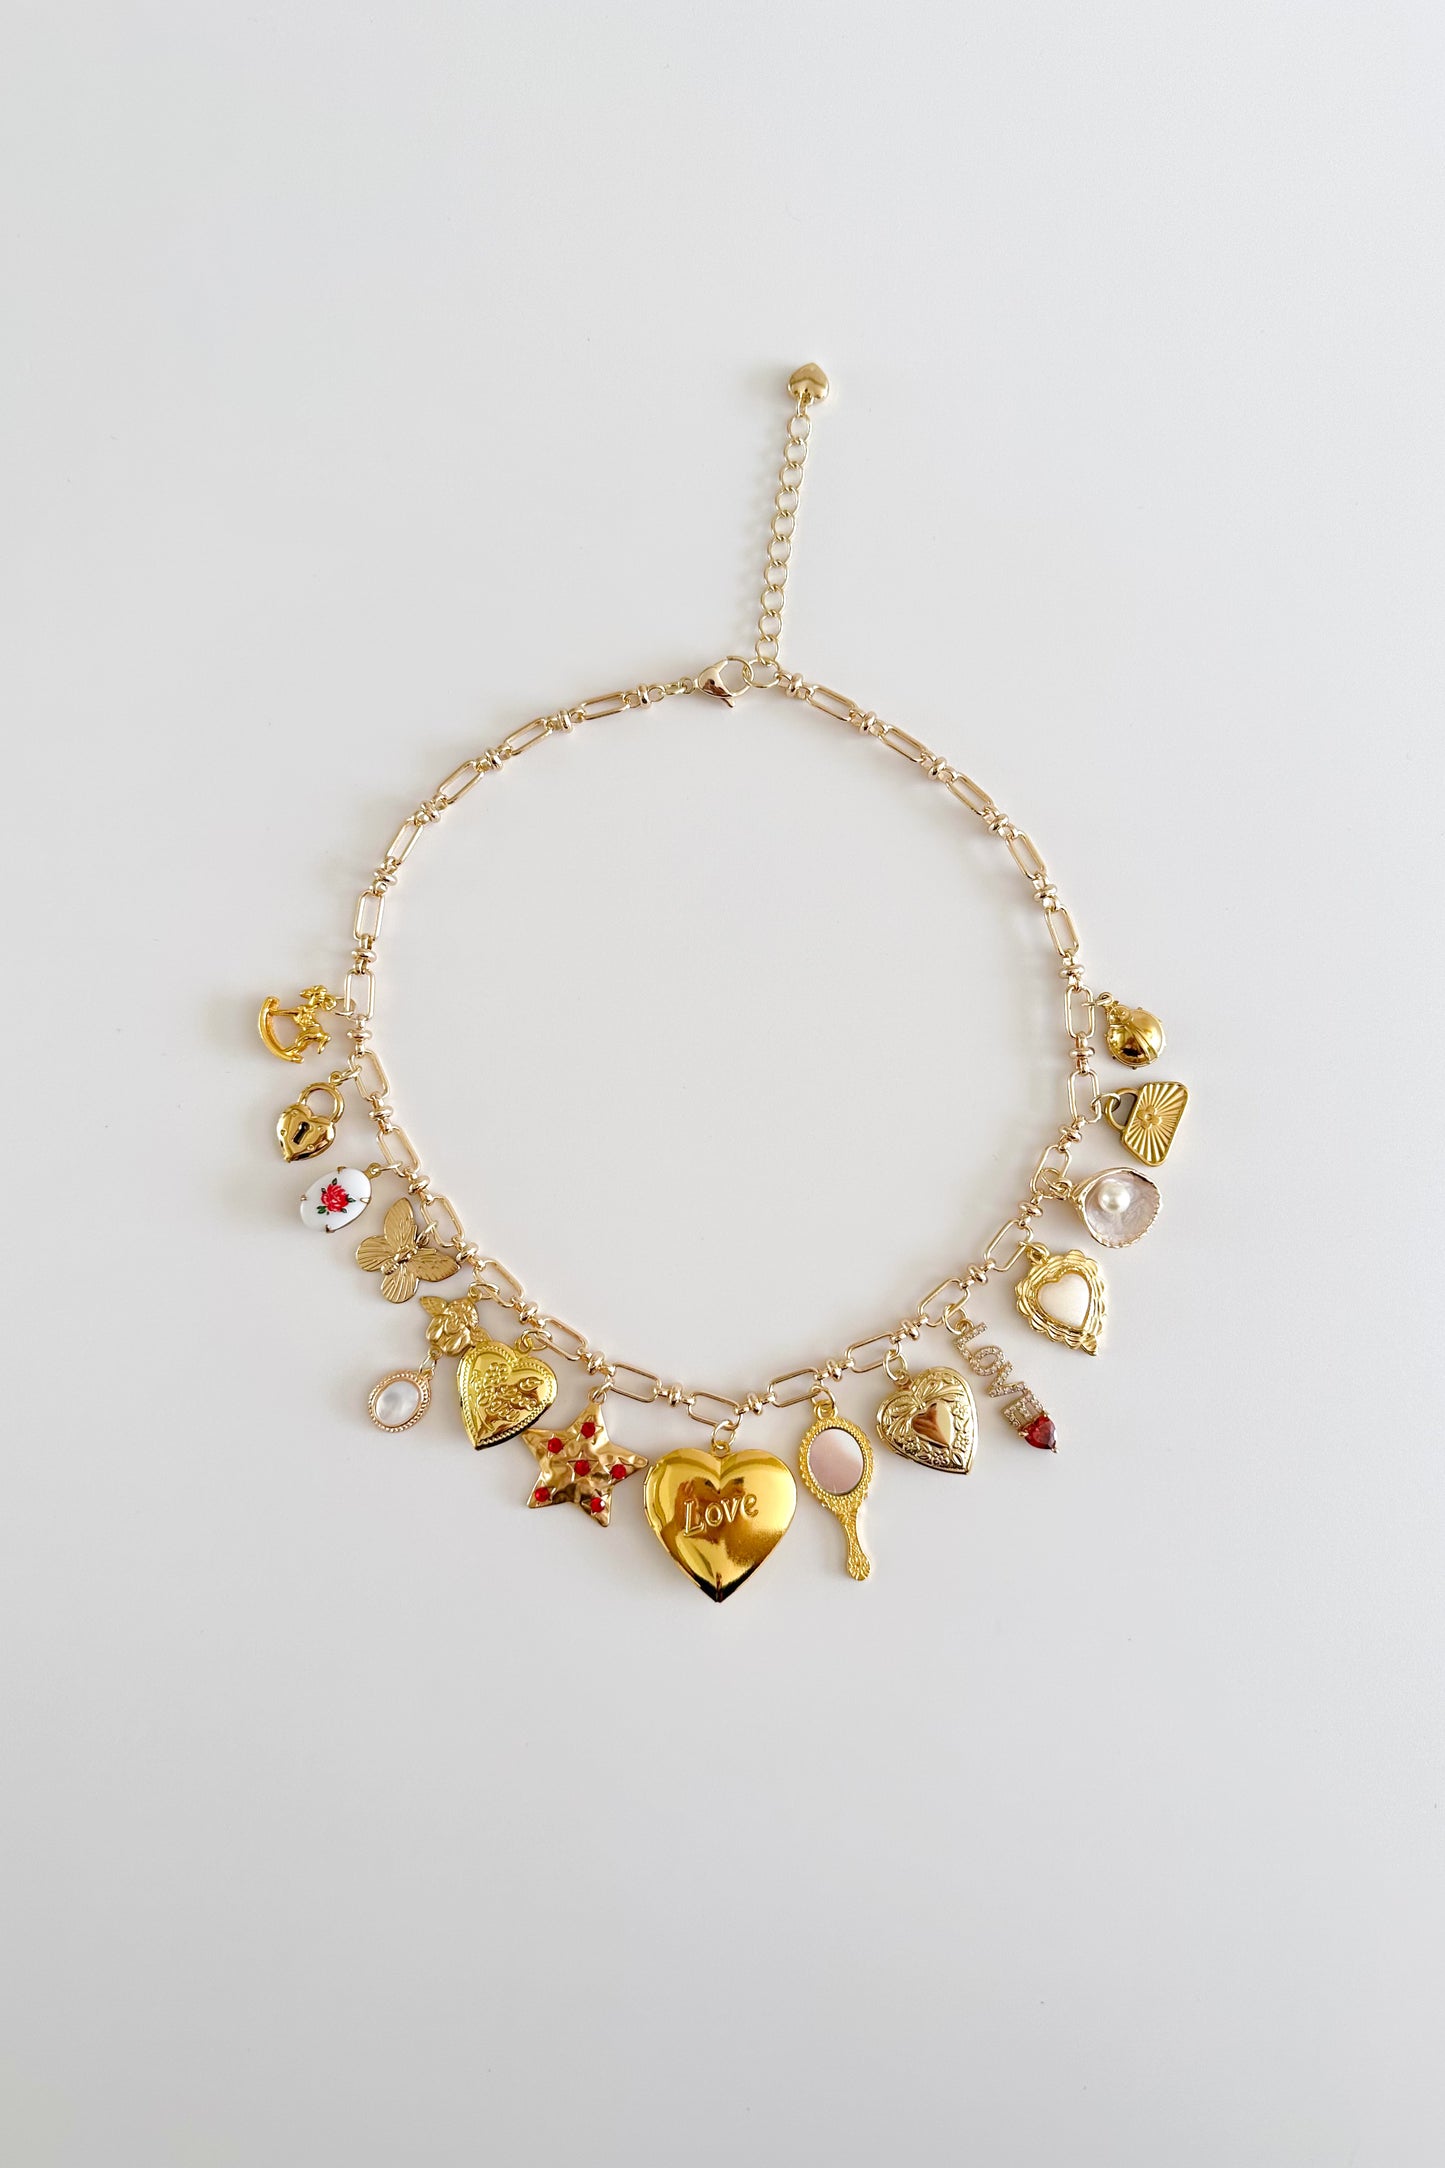 Love & Romance Gold Plated Statement Vintage Charm Necklace